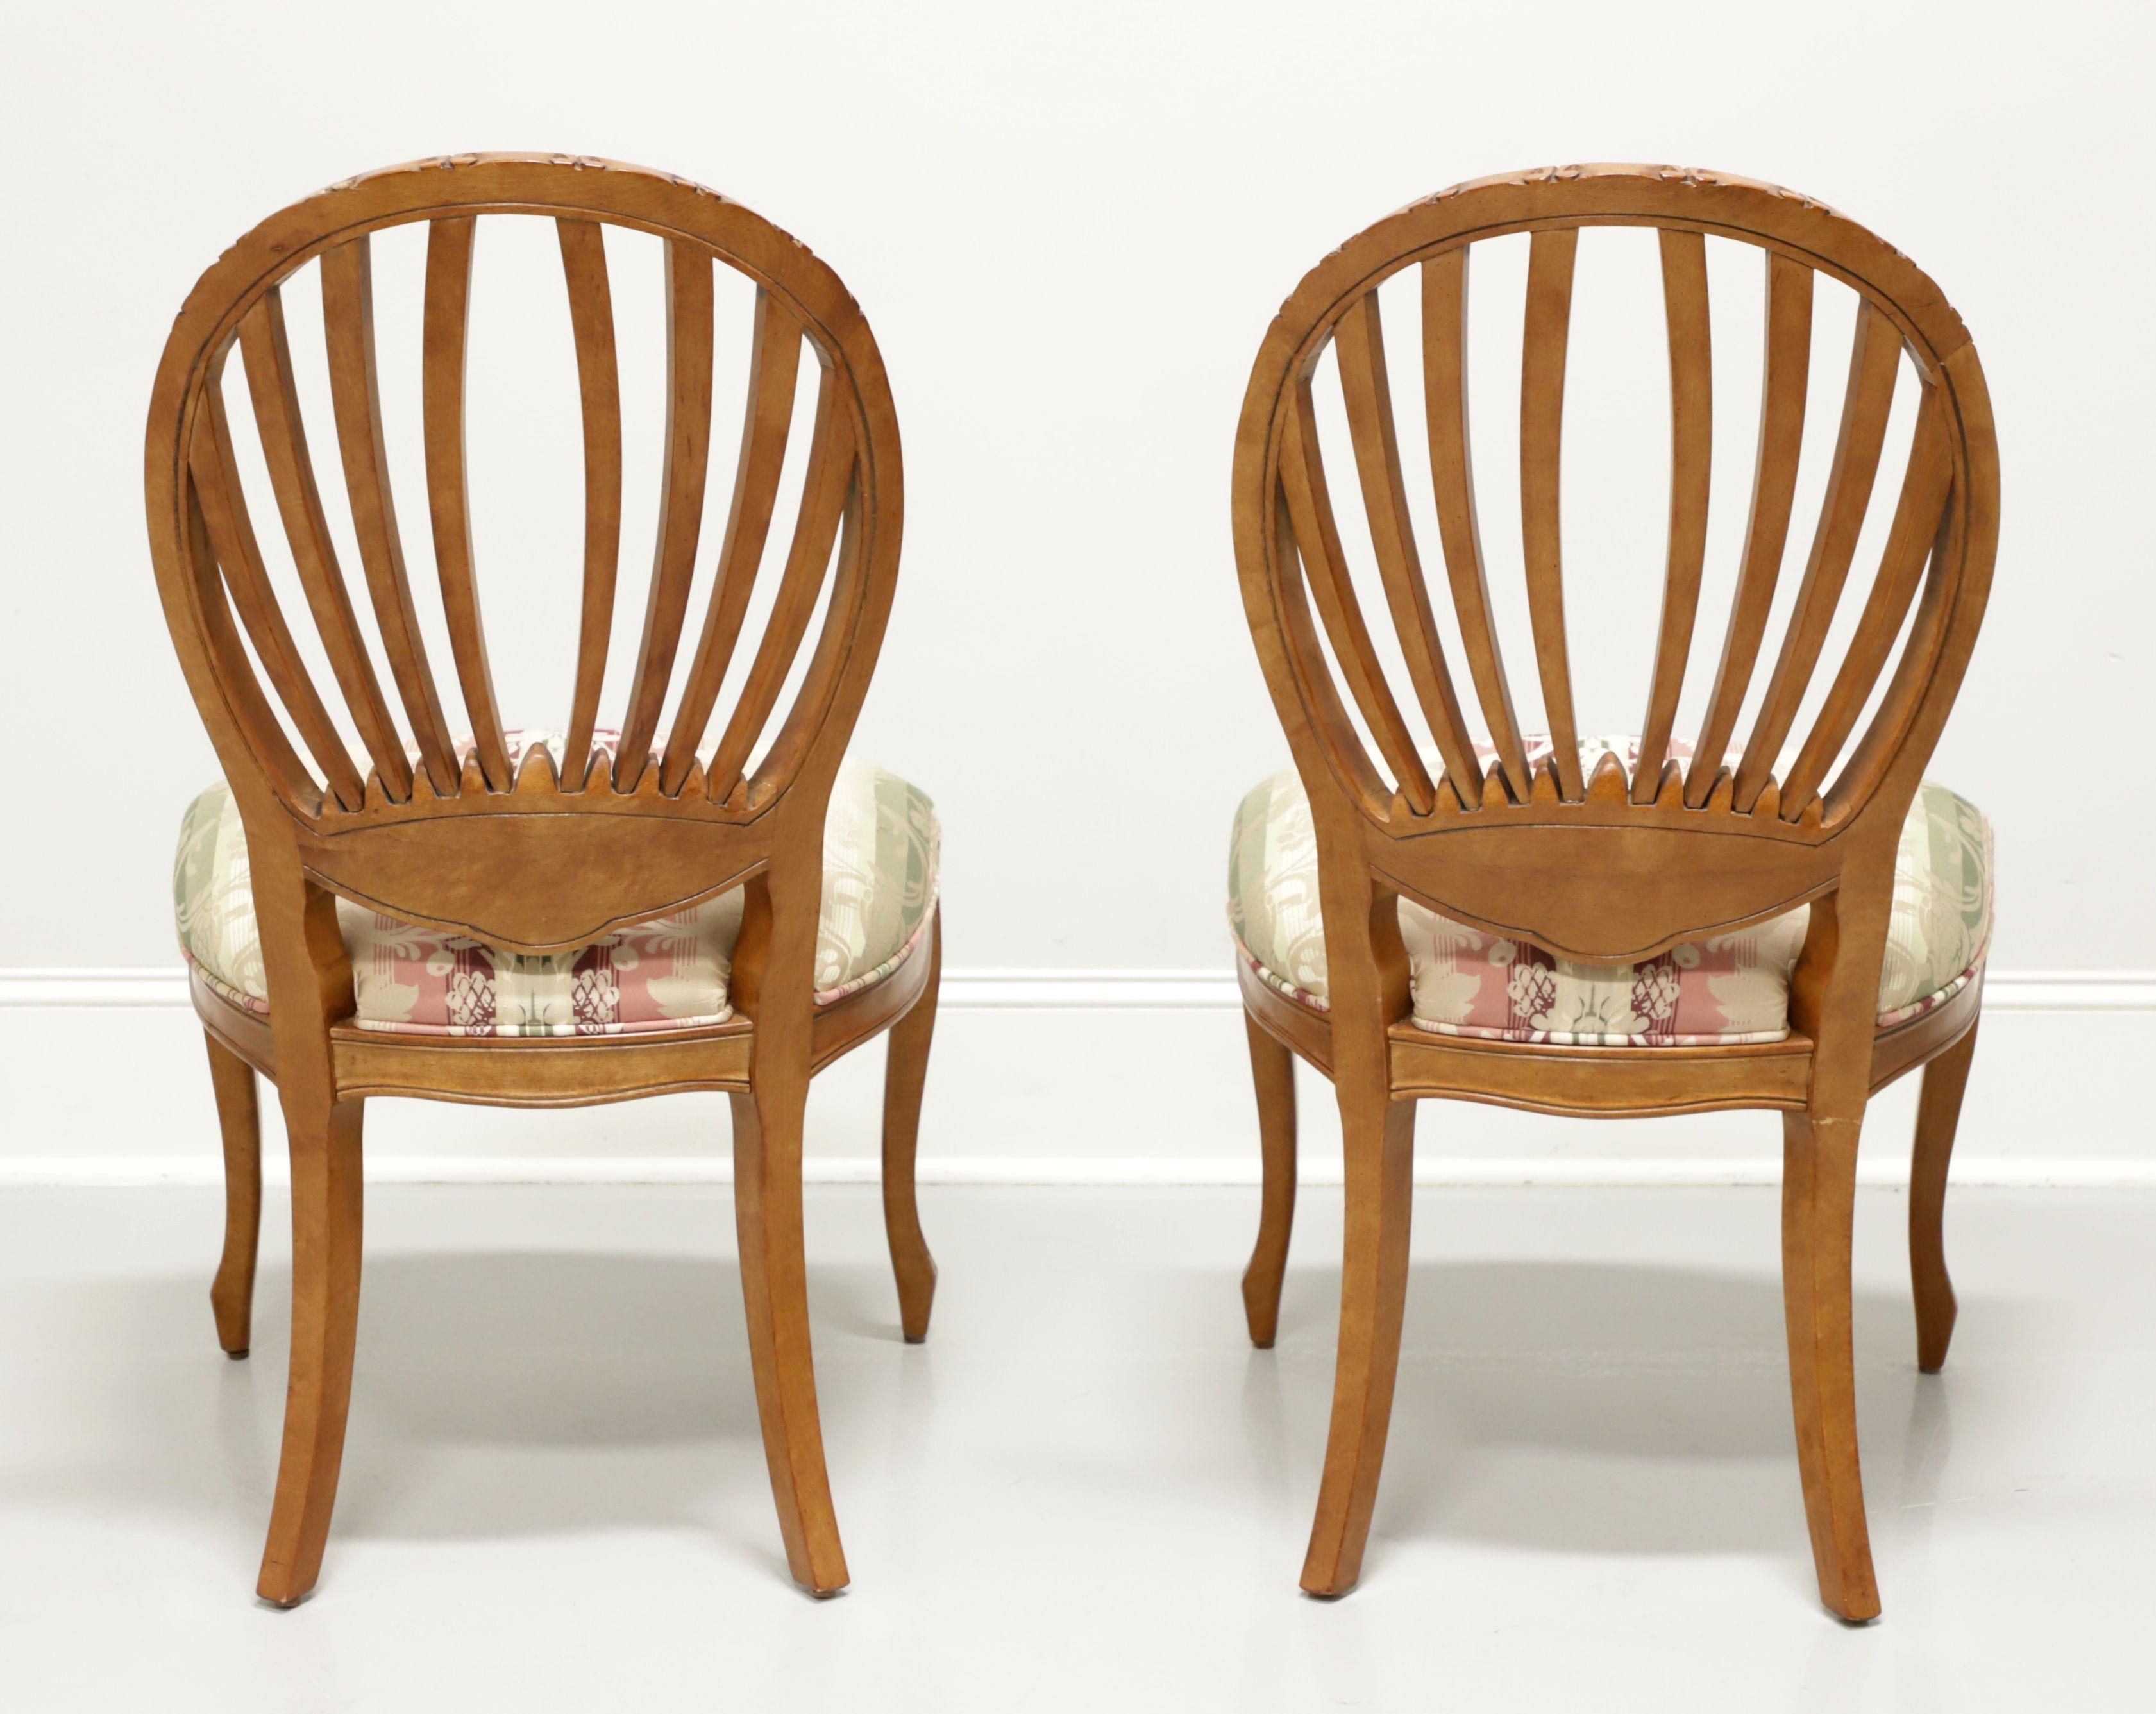 CENTURY French Country Oval Back Dining Side Chairs - Pair B In Good Condition For Sale In Charlotte, NC